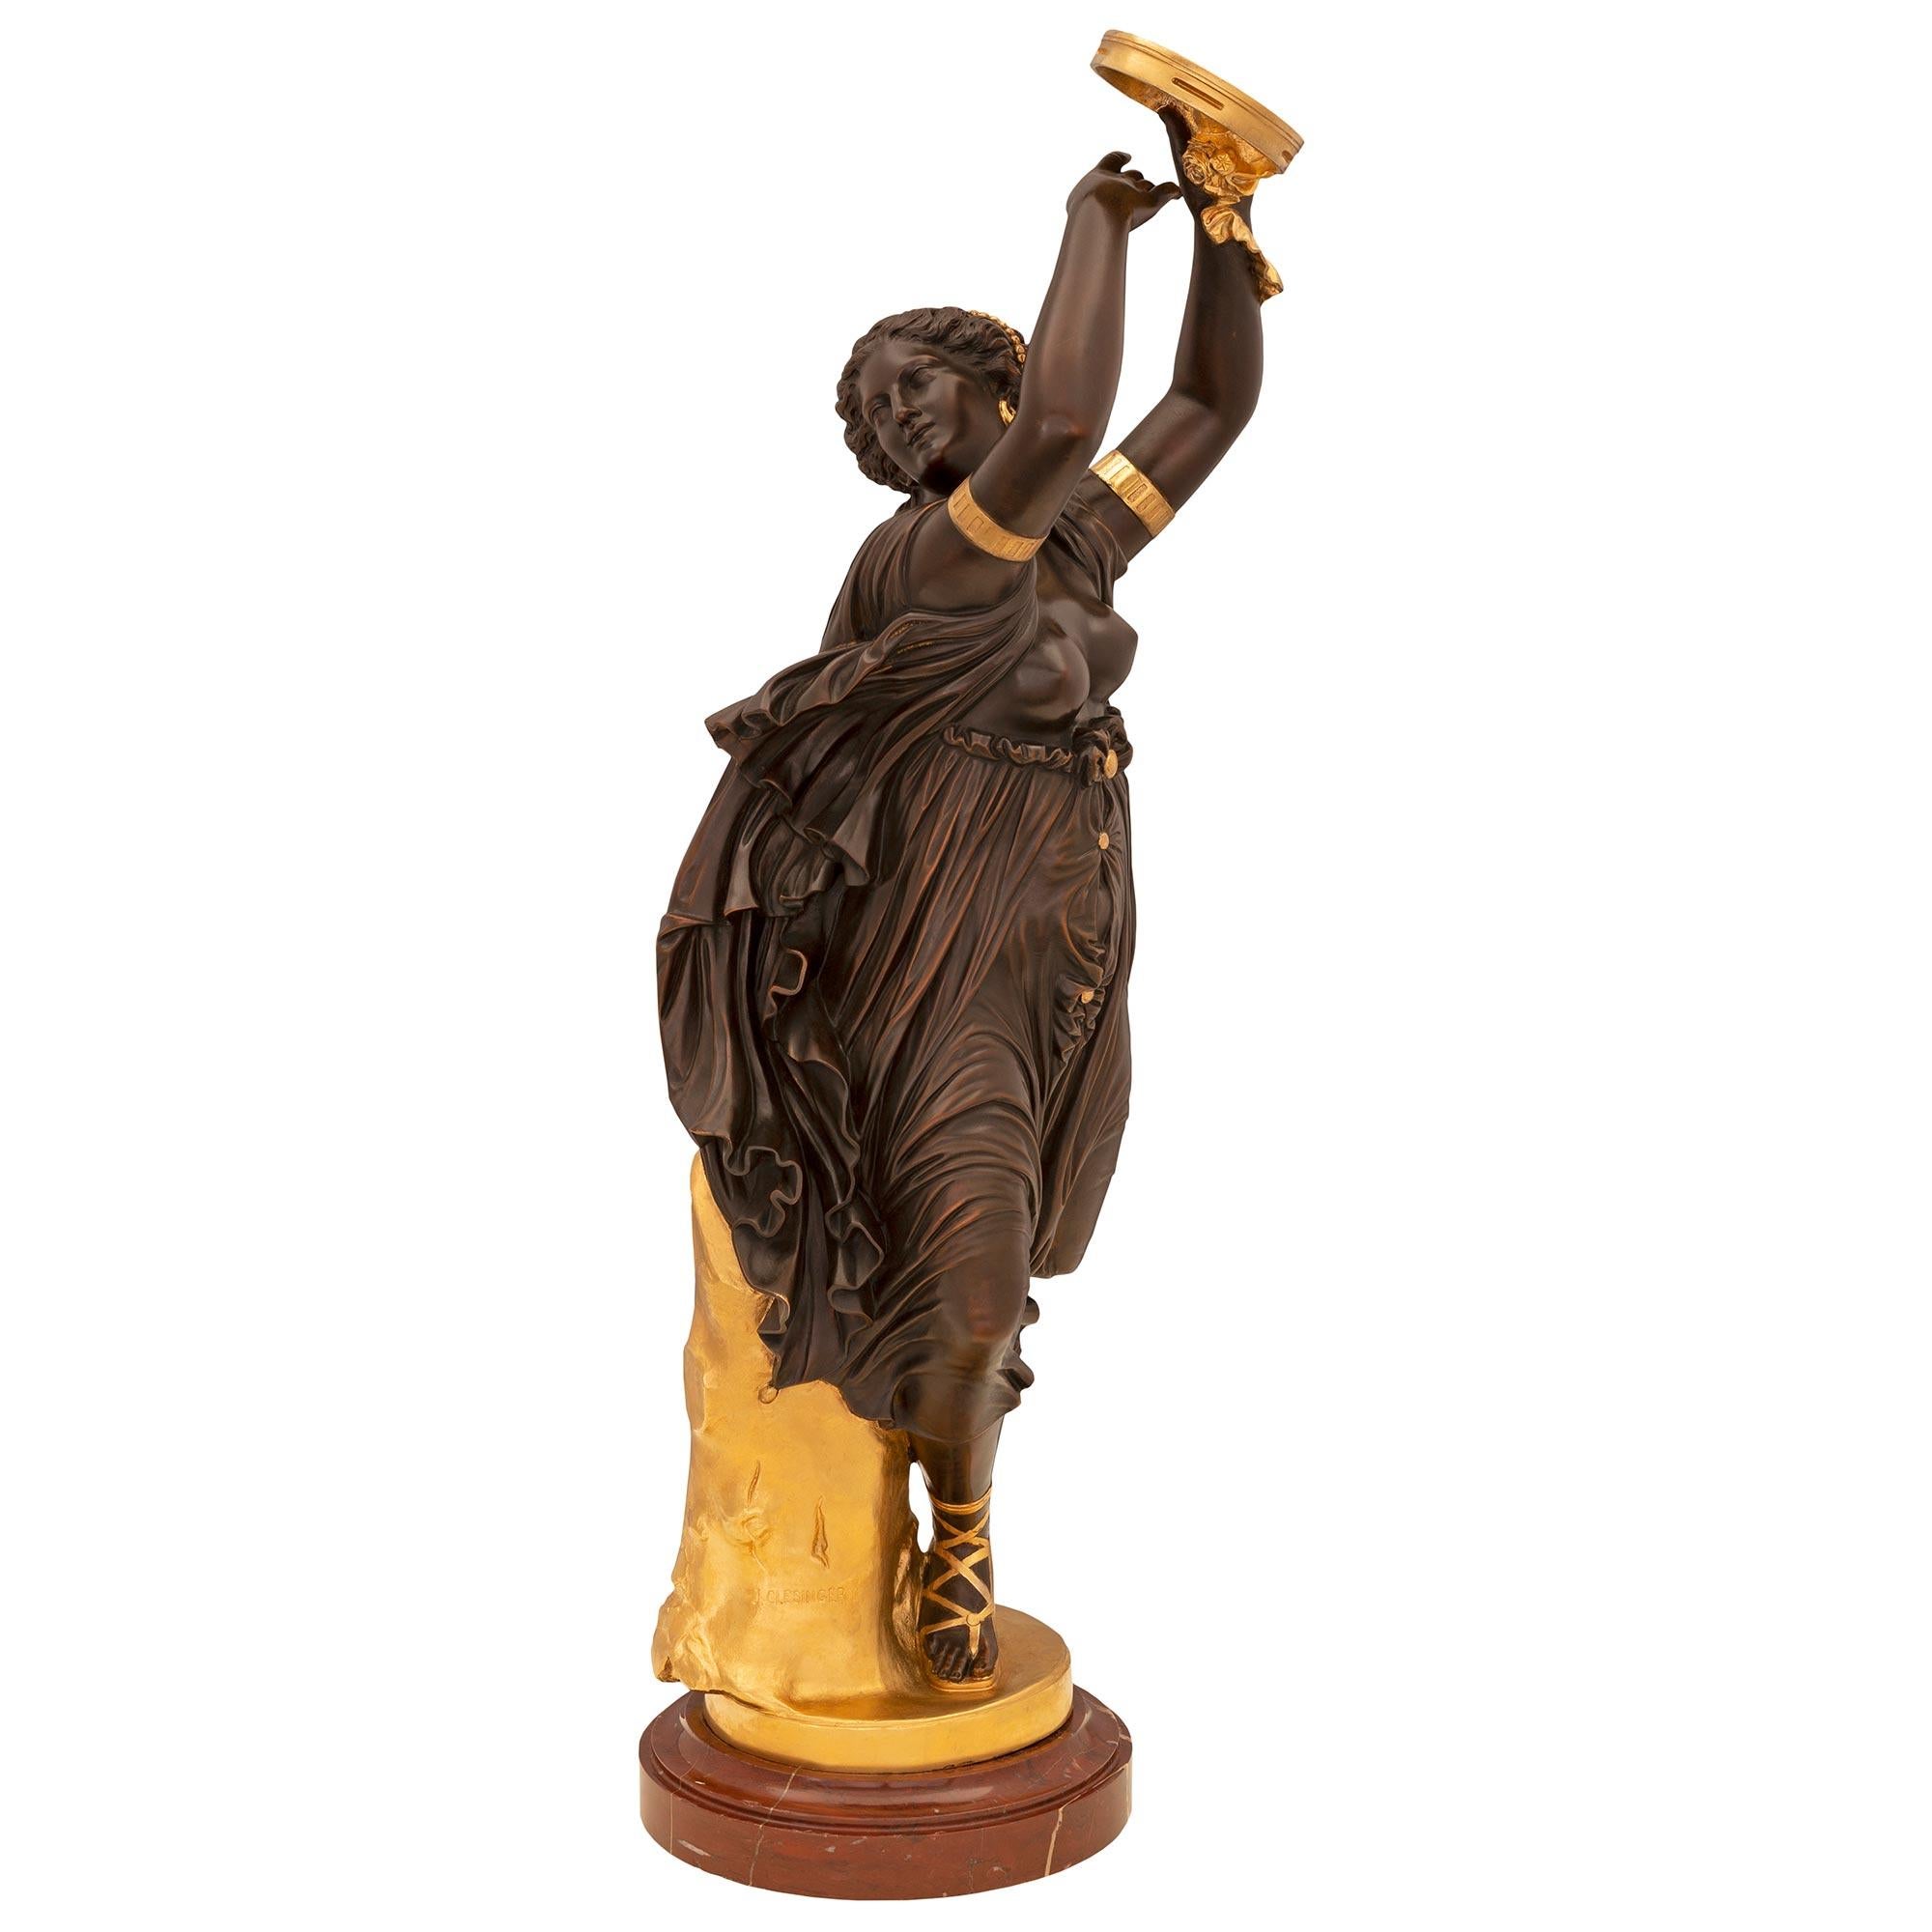 A wonderful and very high quality French 19th century patinated bronze, ormolu, and Rouge Royale marble statue signed J. Clésinger. The statue is raised by an elegant circular Rouge Royale marble base with a fine mottled border. The statue above